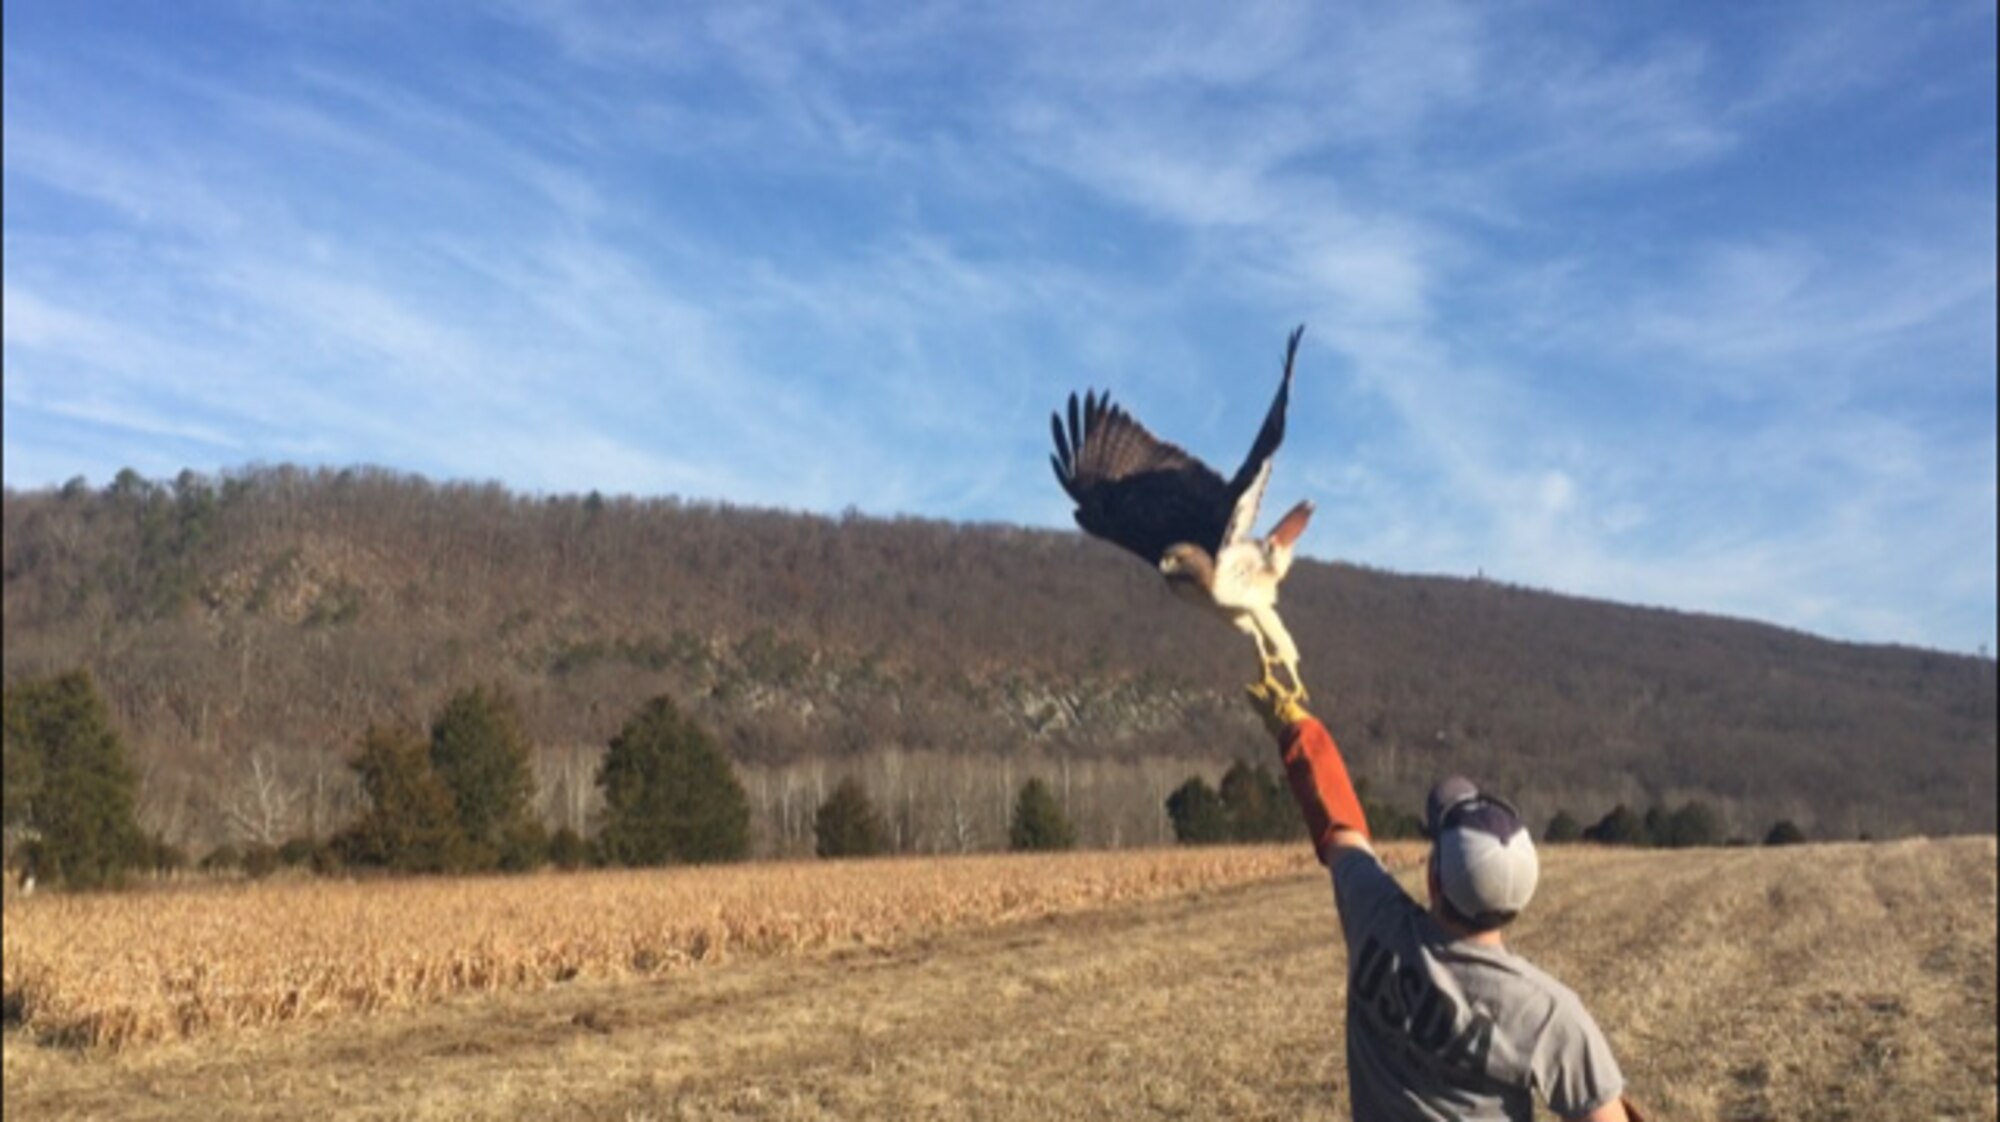 Travis Flanagan releases a banded red-tail hawk at a wildlife management area in Hardy County, W.Va., Feb. 21. The hawk was translocated from the airfield at the 167th Airlfit Wing, Martinsburg, W.Va